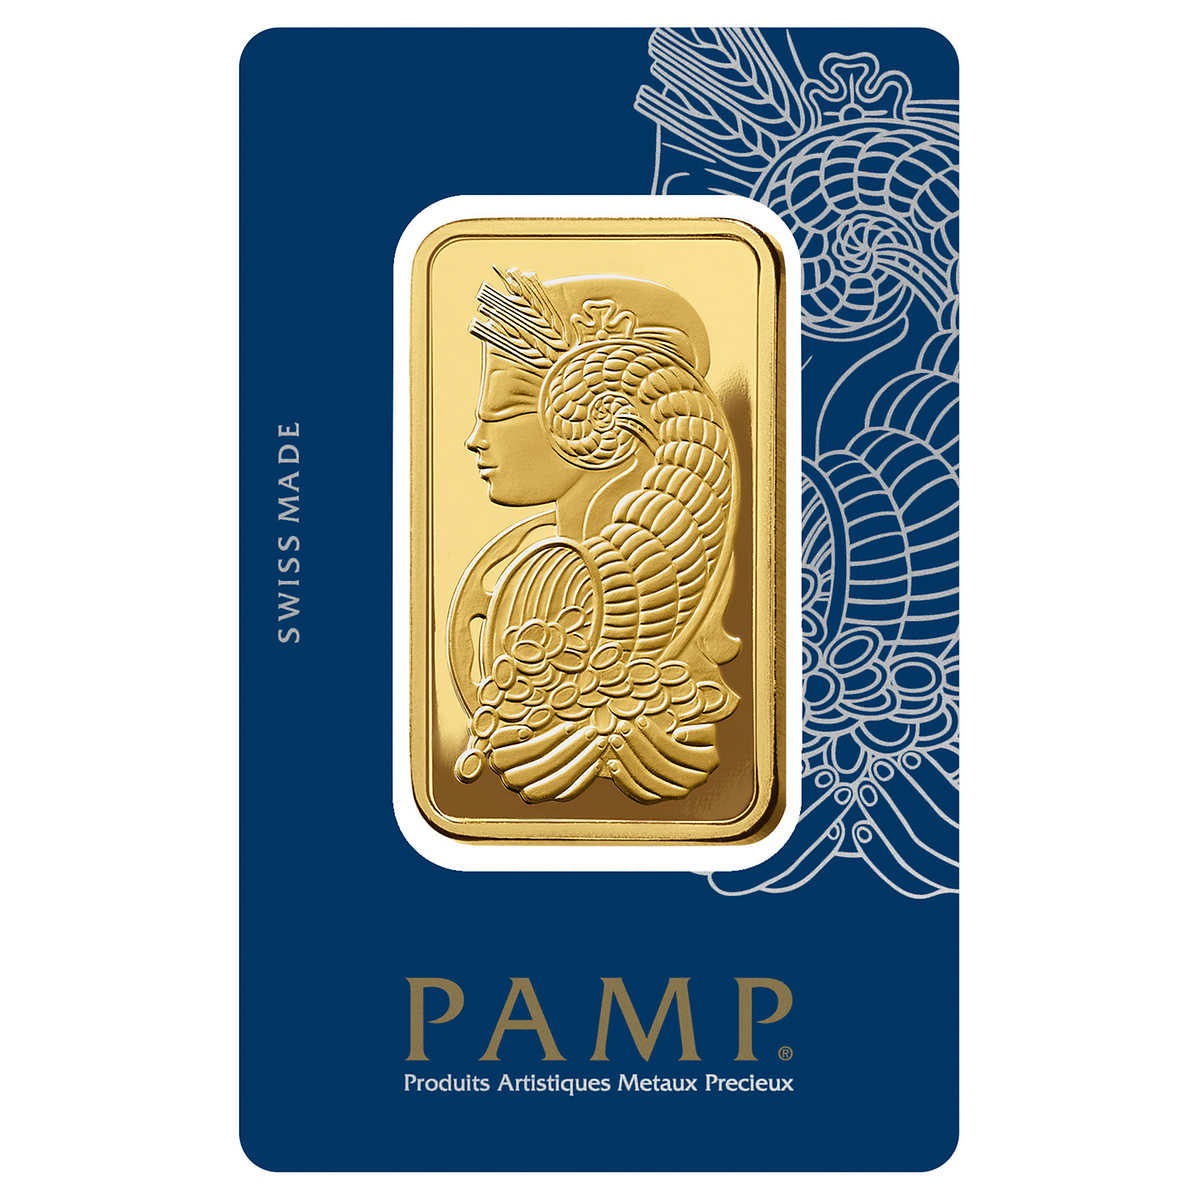 100 Gram Gold Bar Pamp Suisse Lady Fortuna Veriscan (New In Assay) - $7999